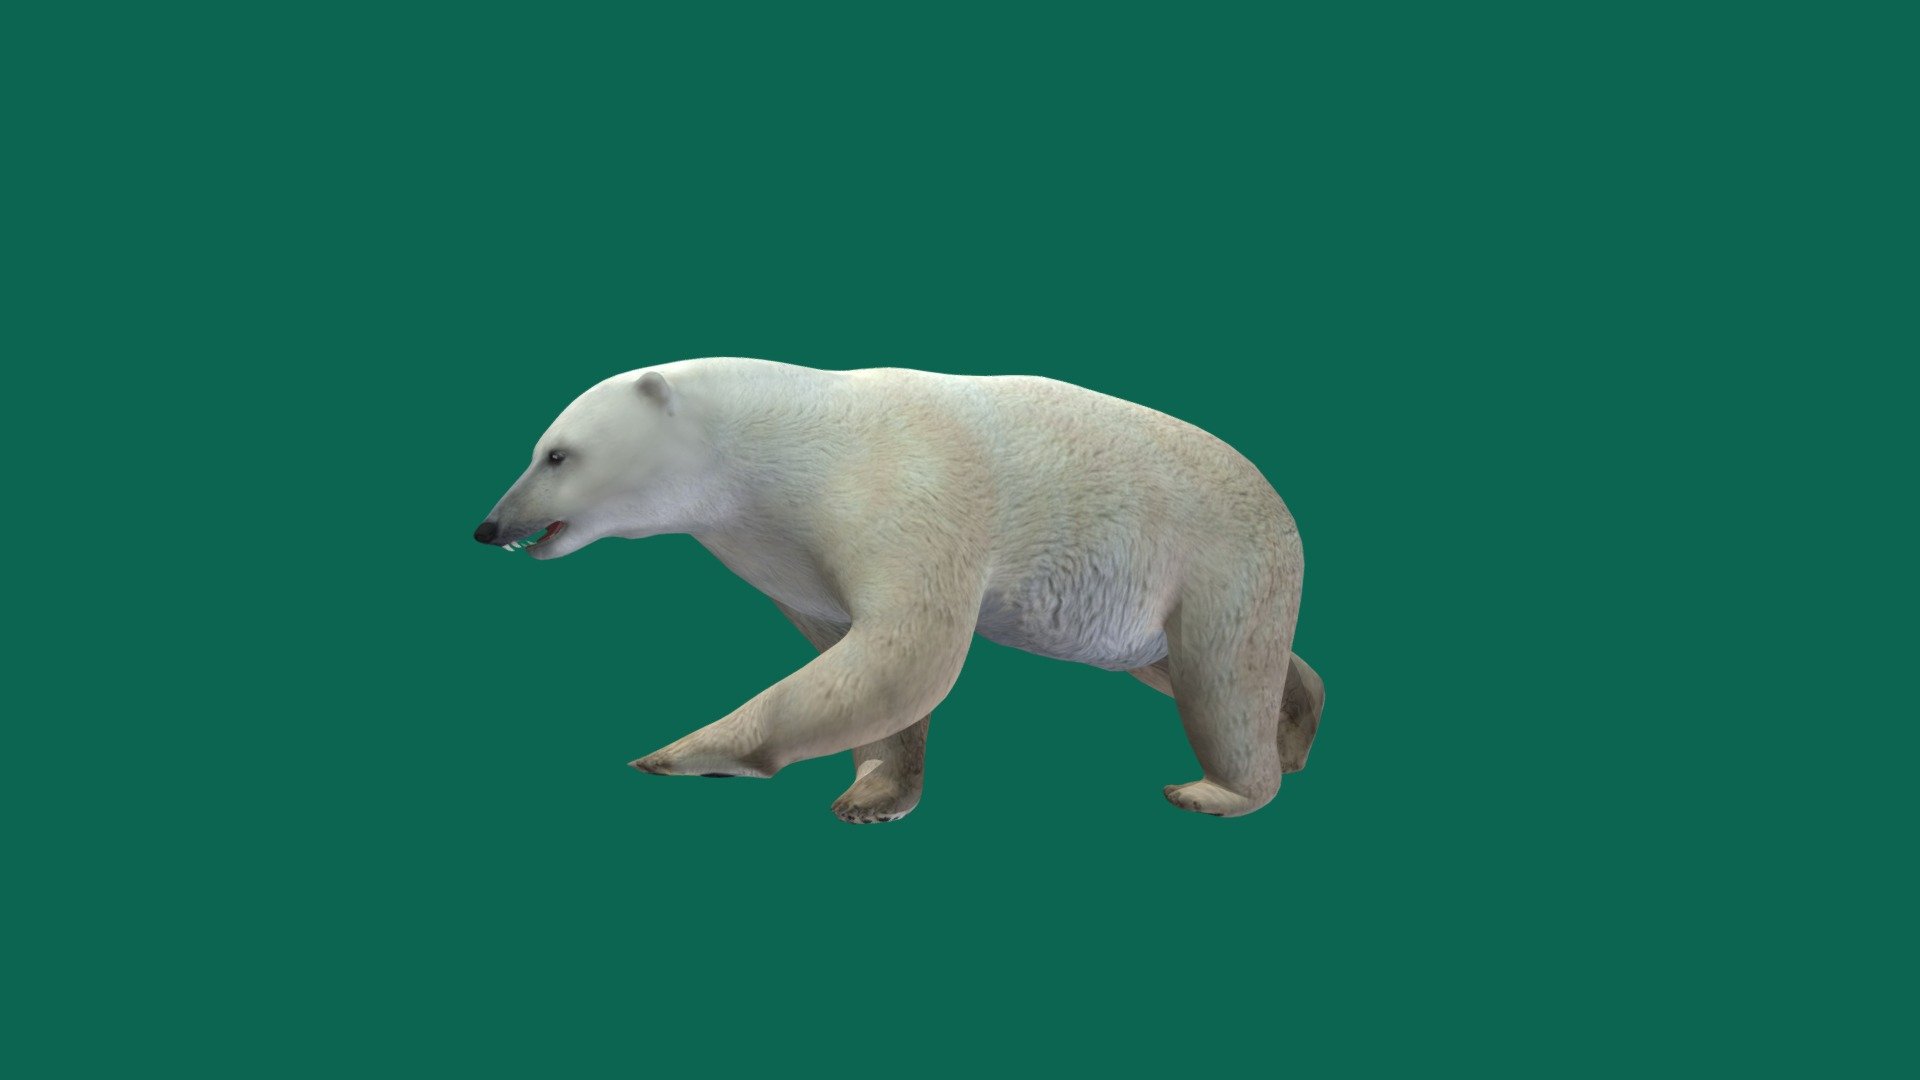 Test Phase Non commercial
2K Diffuse Color Test only 
ABC Test animations 
Polar Bear 
The polar bear is a hypercarnivorous species of bear. Its native range lies largely within the Arctic Circle, encompassing the Arctic Ocean and its surrounding seas and landmasses, which includes the northernmost regions of North America and Eurasia.

i am kind of unwell at the moment but i will finish up better texture real soon 3d model